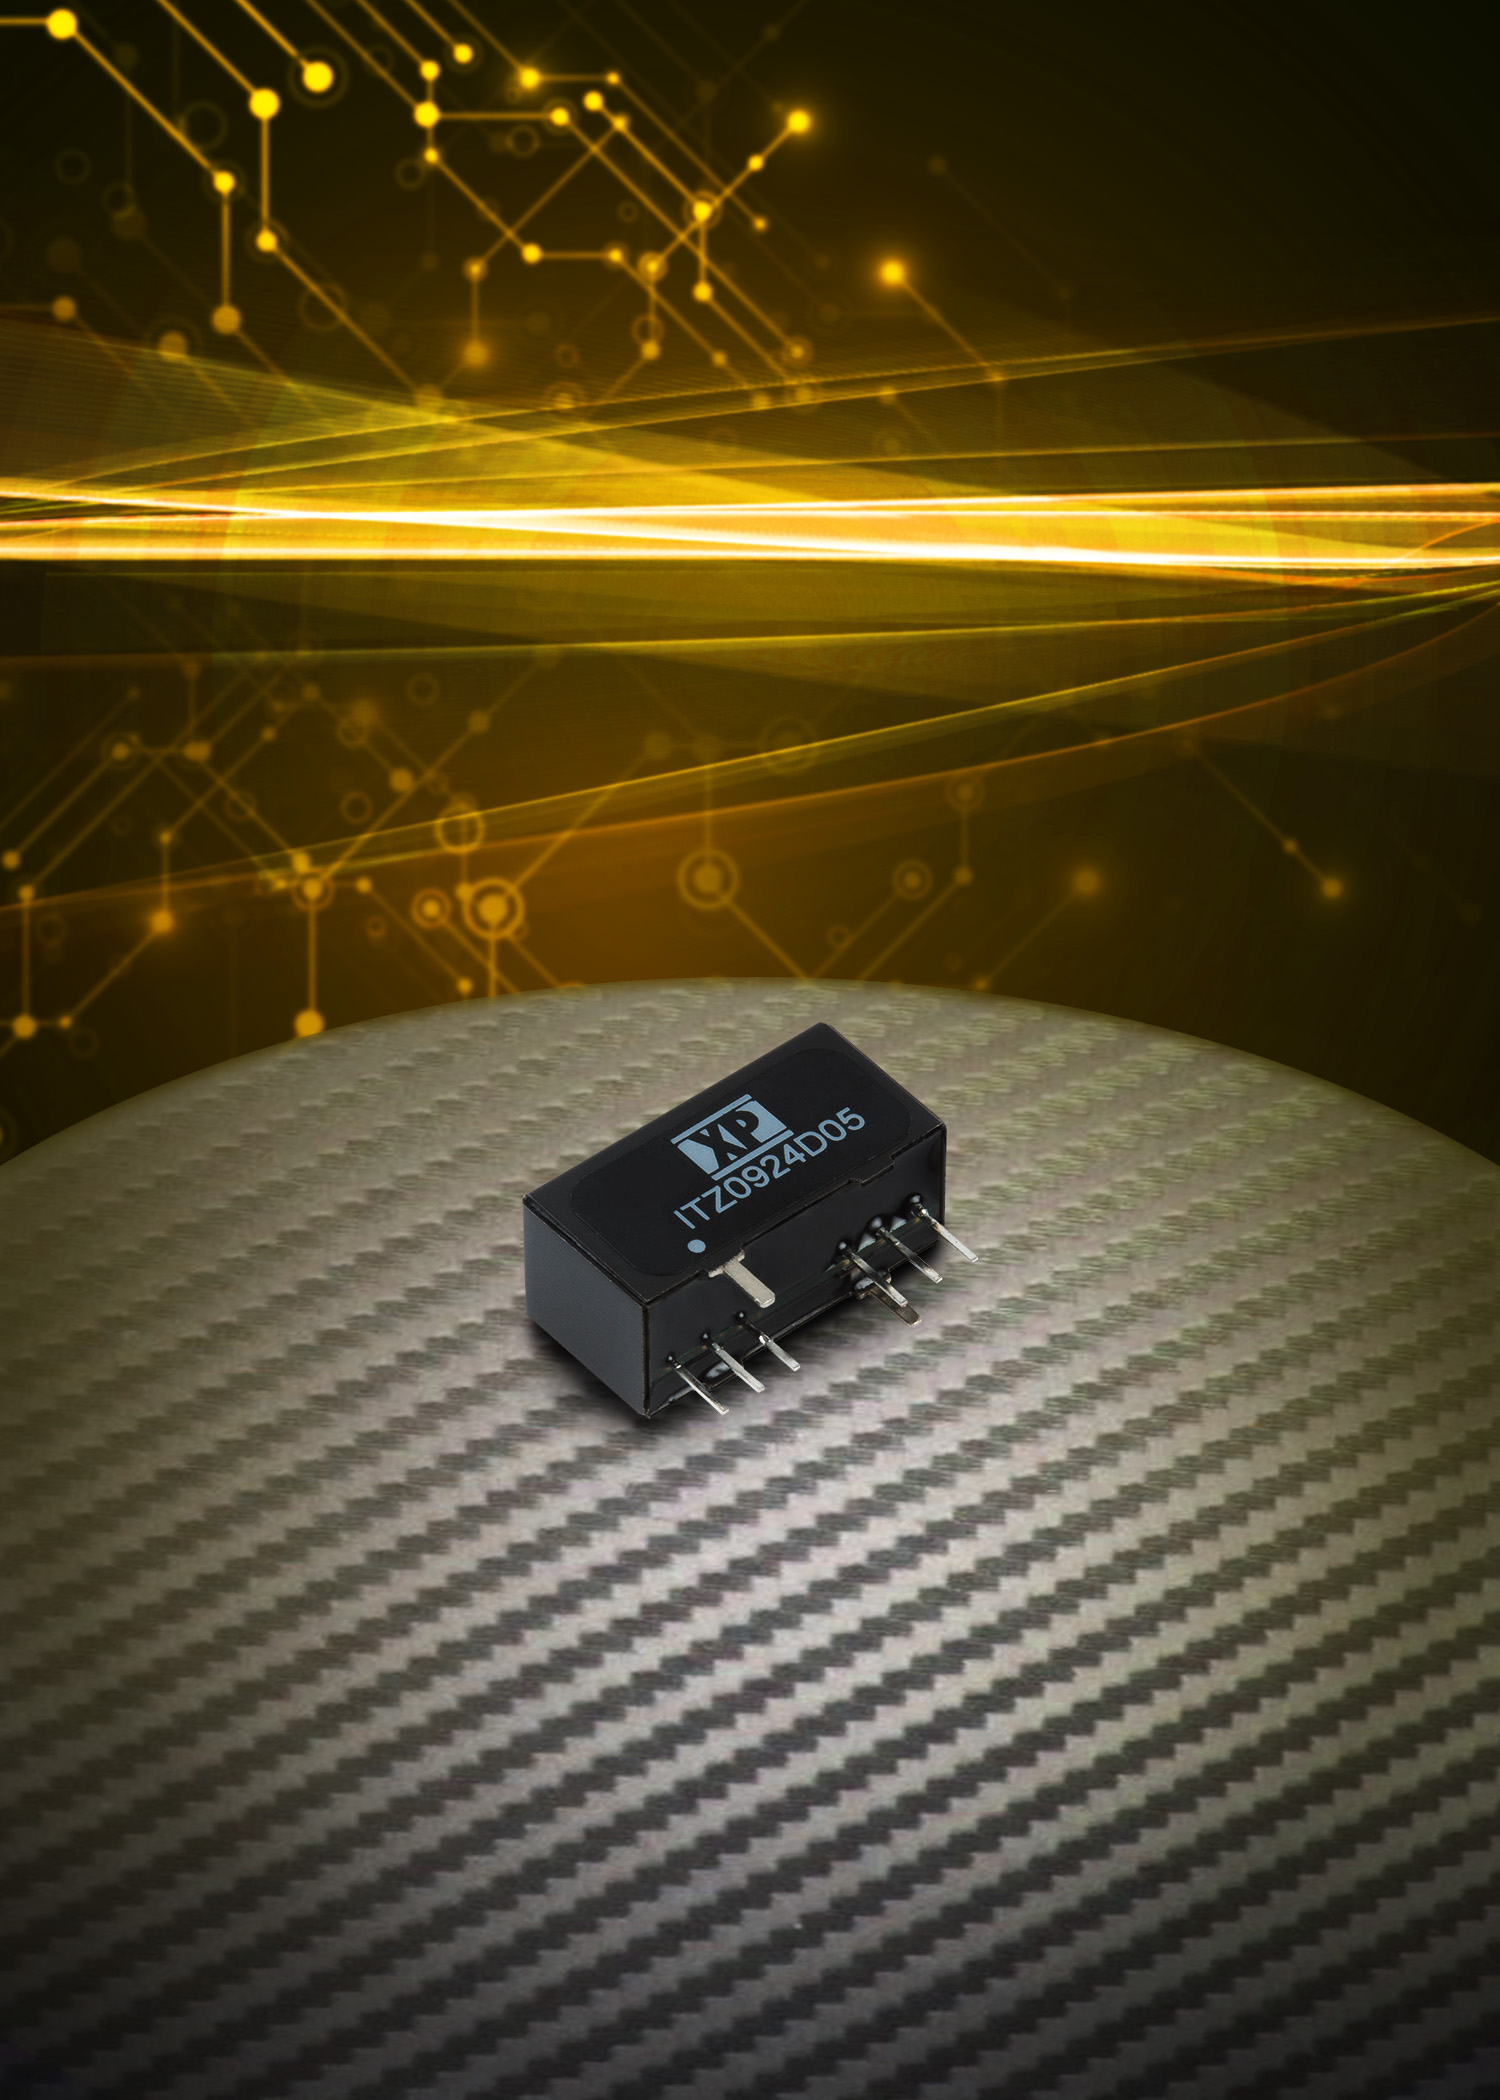 Industry’s smallest regulated and isolated 9 W DC-DC converters offer 4:1 input range